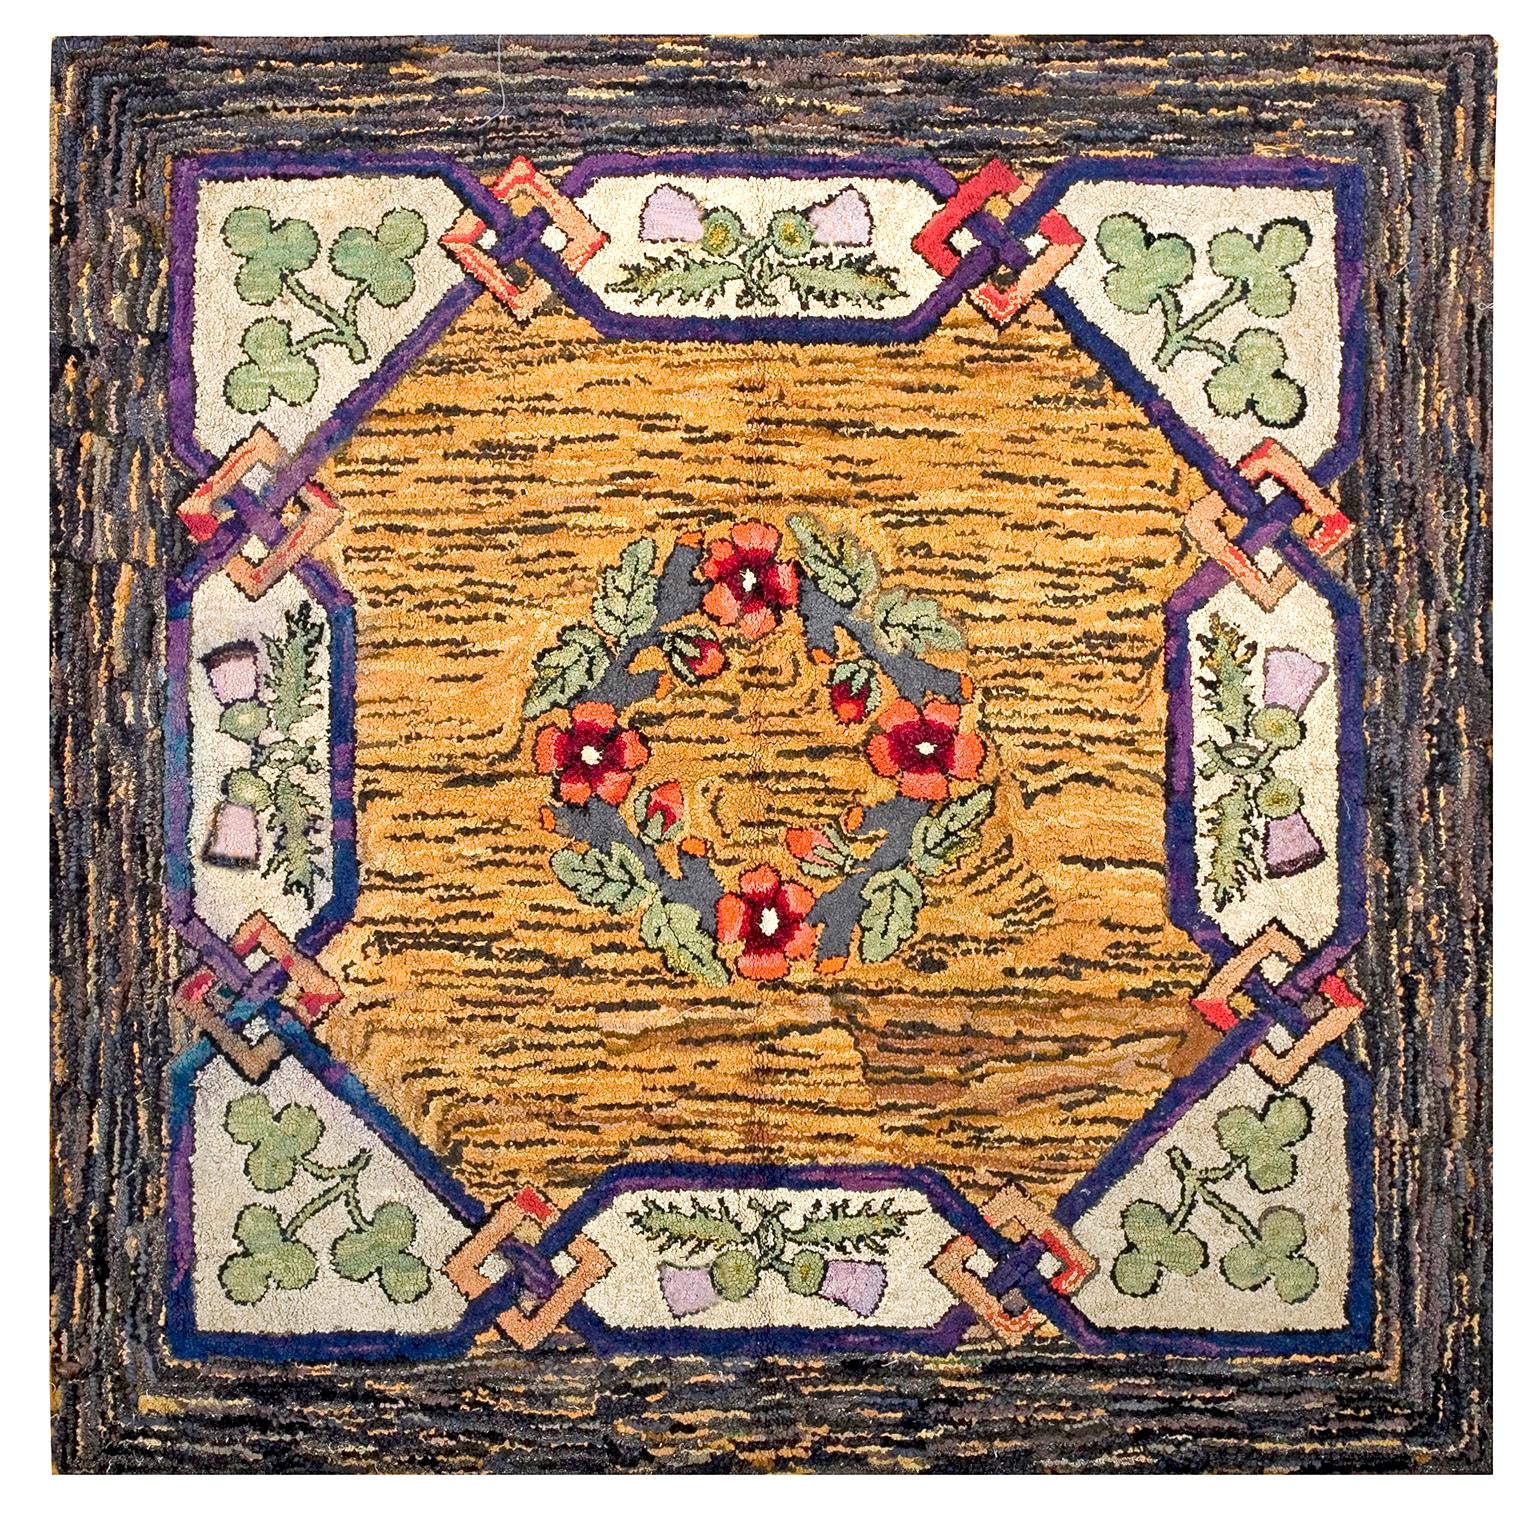 Early 20th Century American Hooked Rug ( 6' x 6' - 183 x 183 )